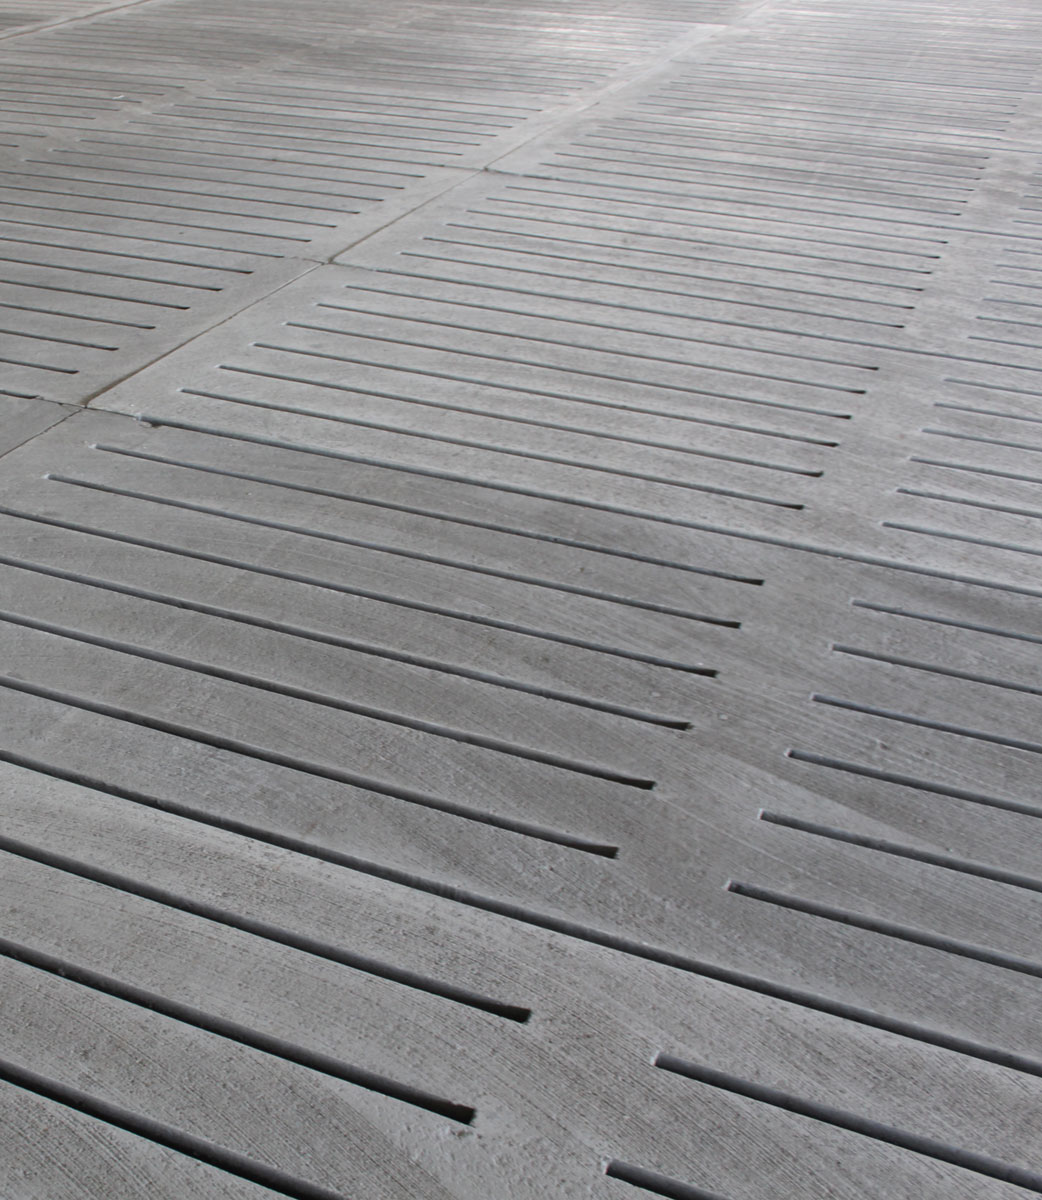 Hog Slat slats are the most superior, high-quality concrete swine flooring solution available on the market for modern pork production facilities.